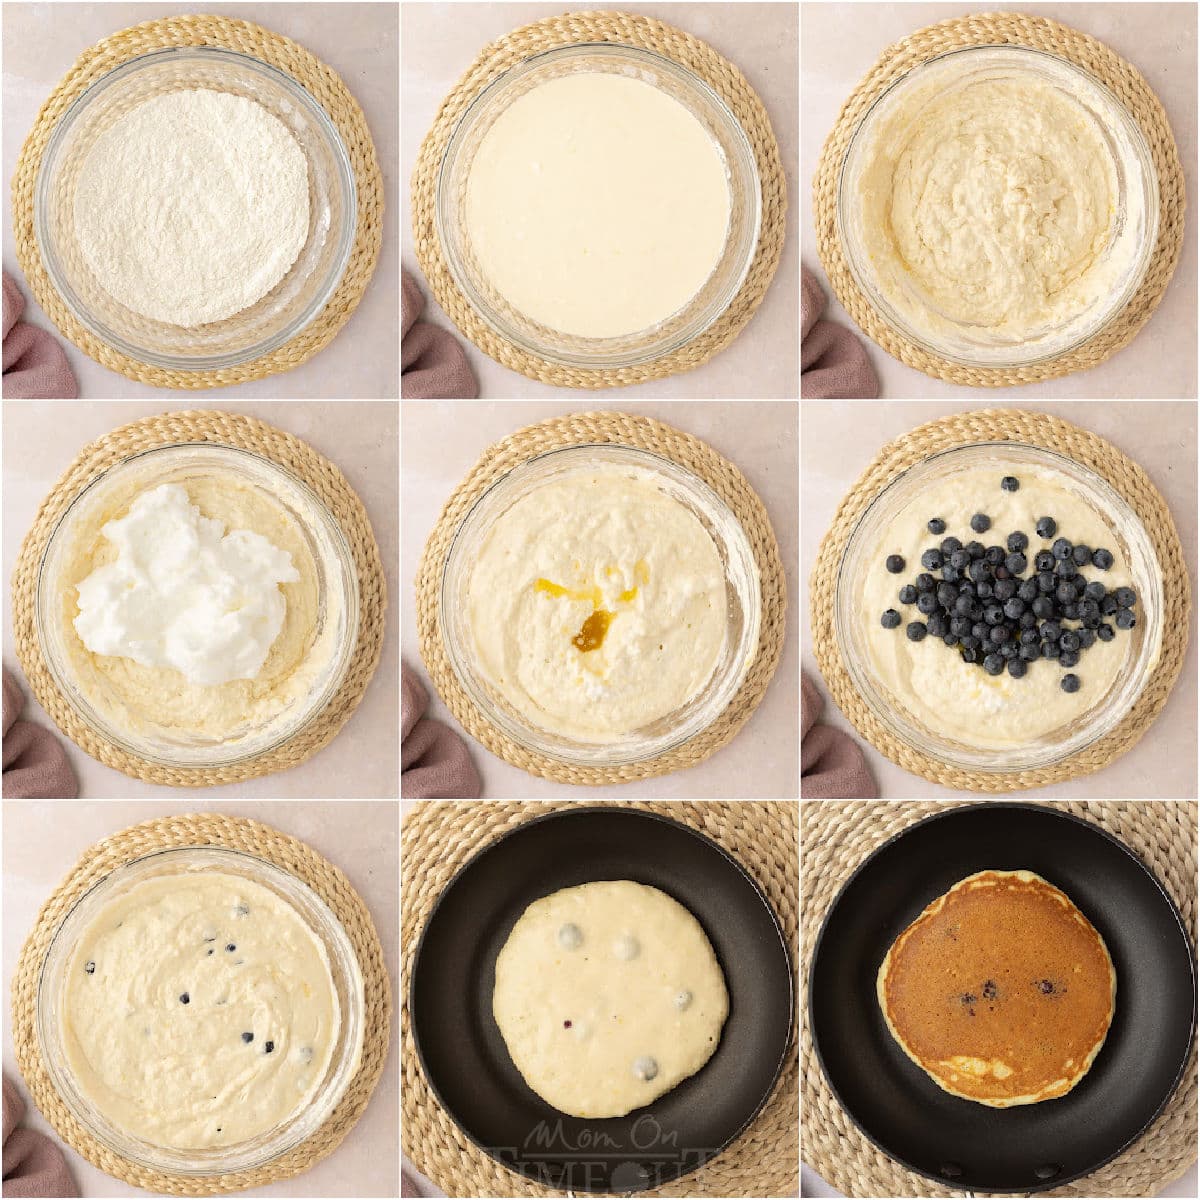 nine image collage showing how to make lemon ricotta pancakes step by step.